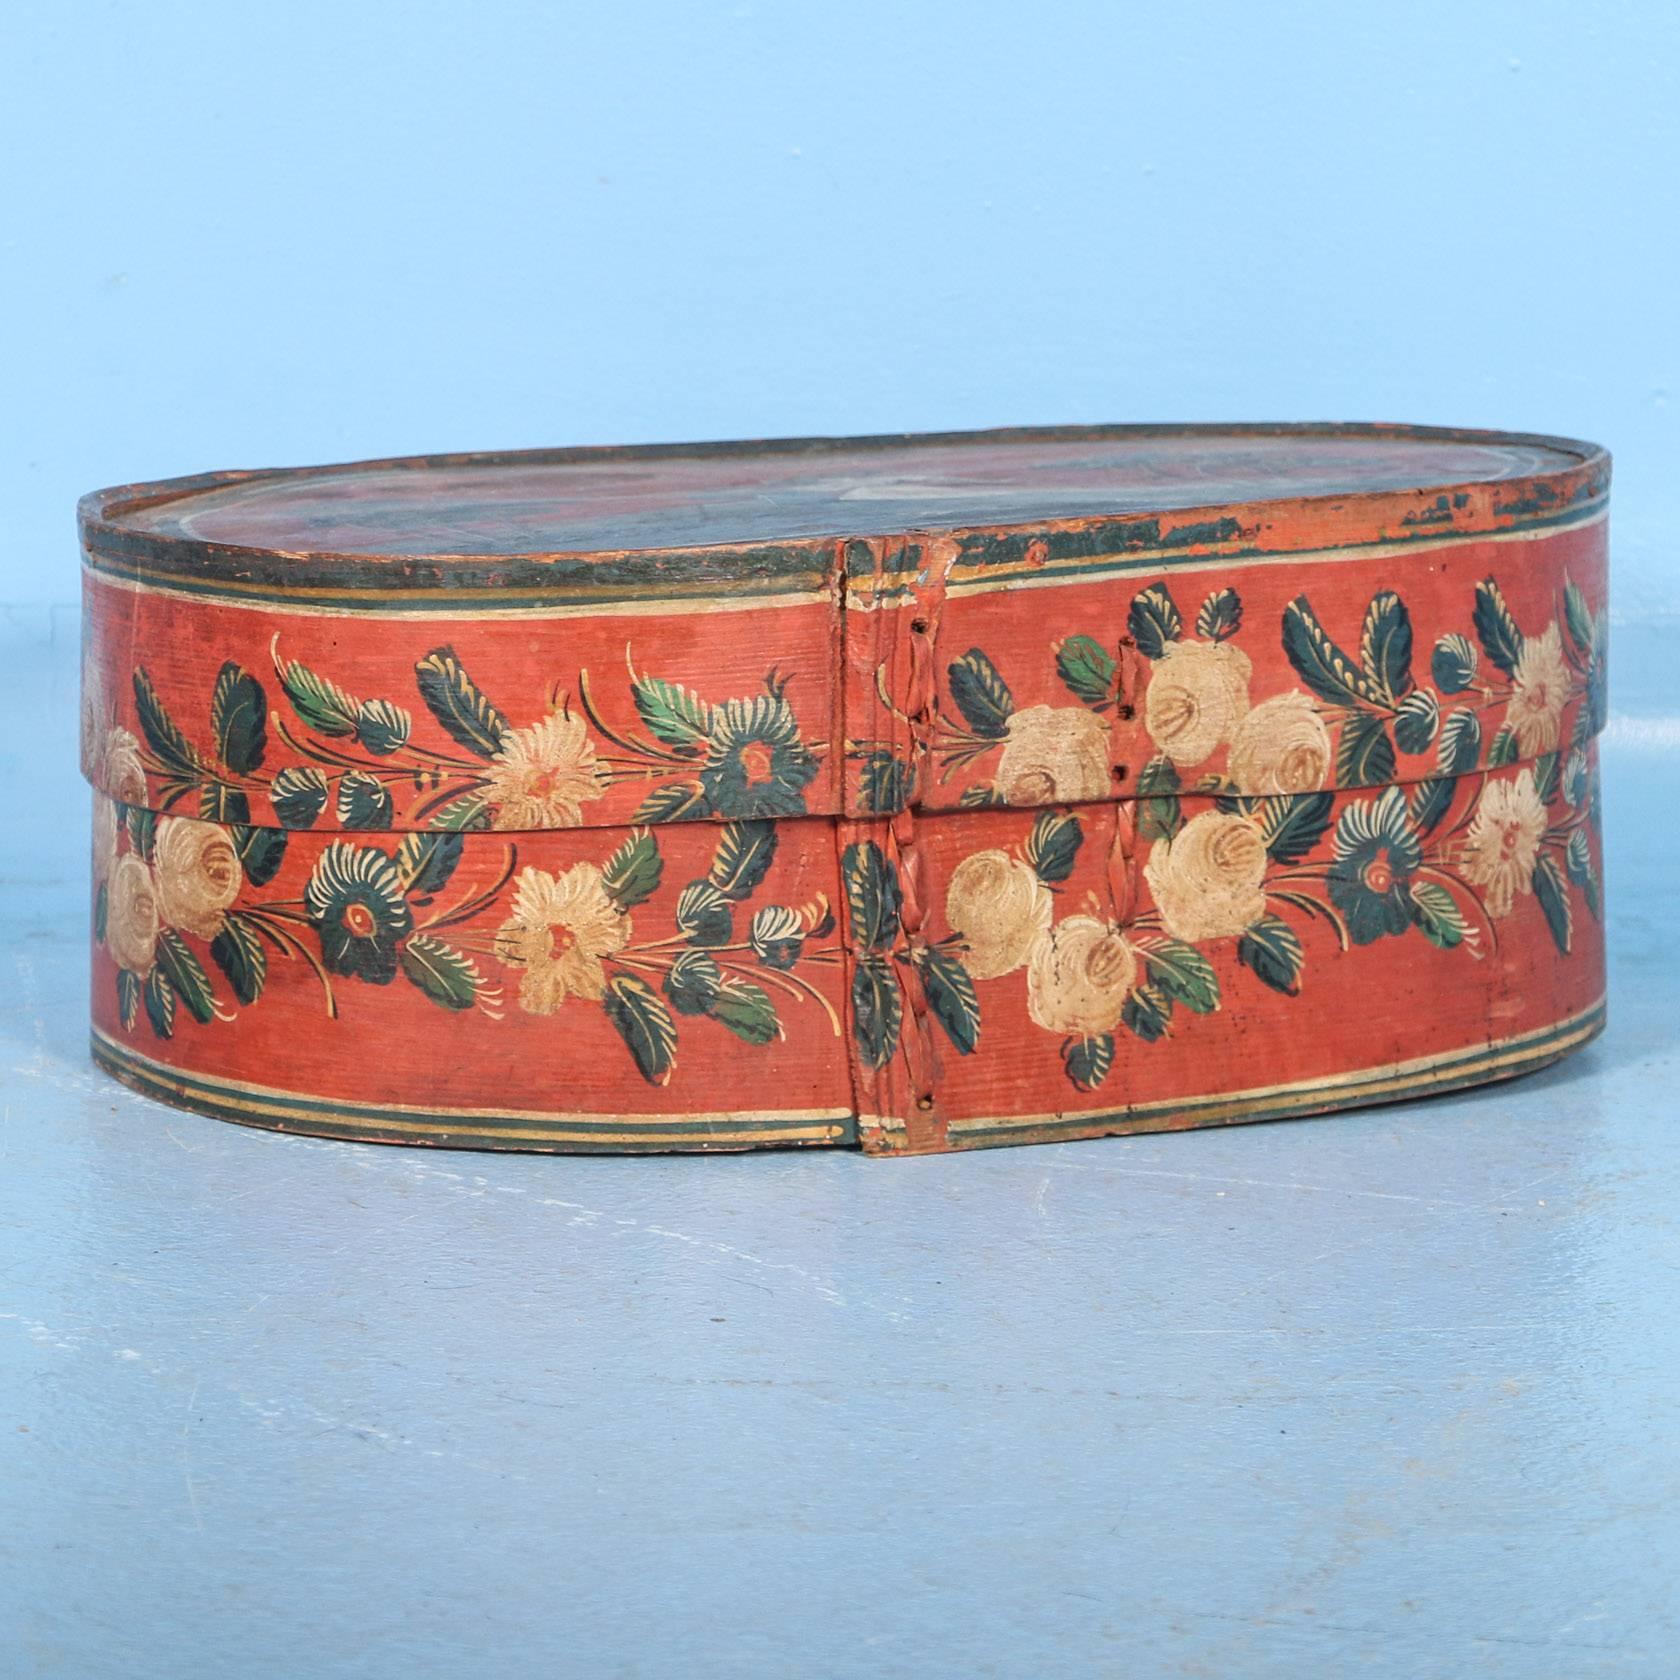 This delightful wooden container or wooden box with lid still maintains the lovely  original folk art paint of a charming couple standing between trees. The man is wearing a top hat, dress coat and walking stick while the lady on his arm has a